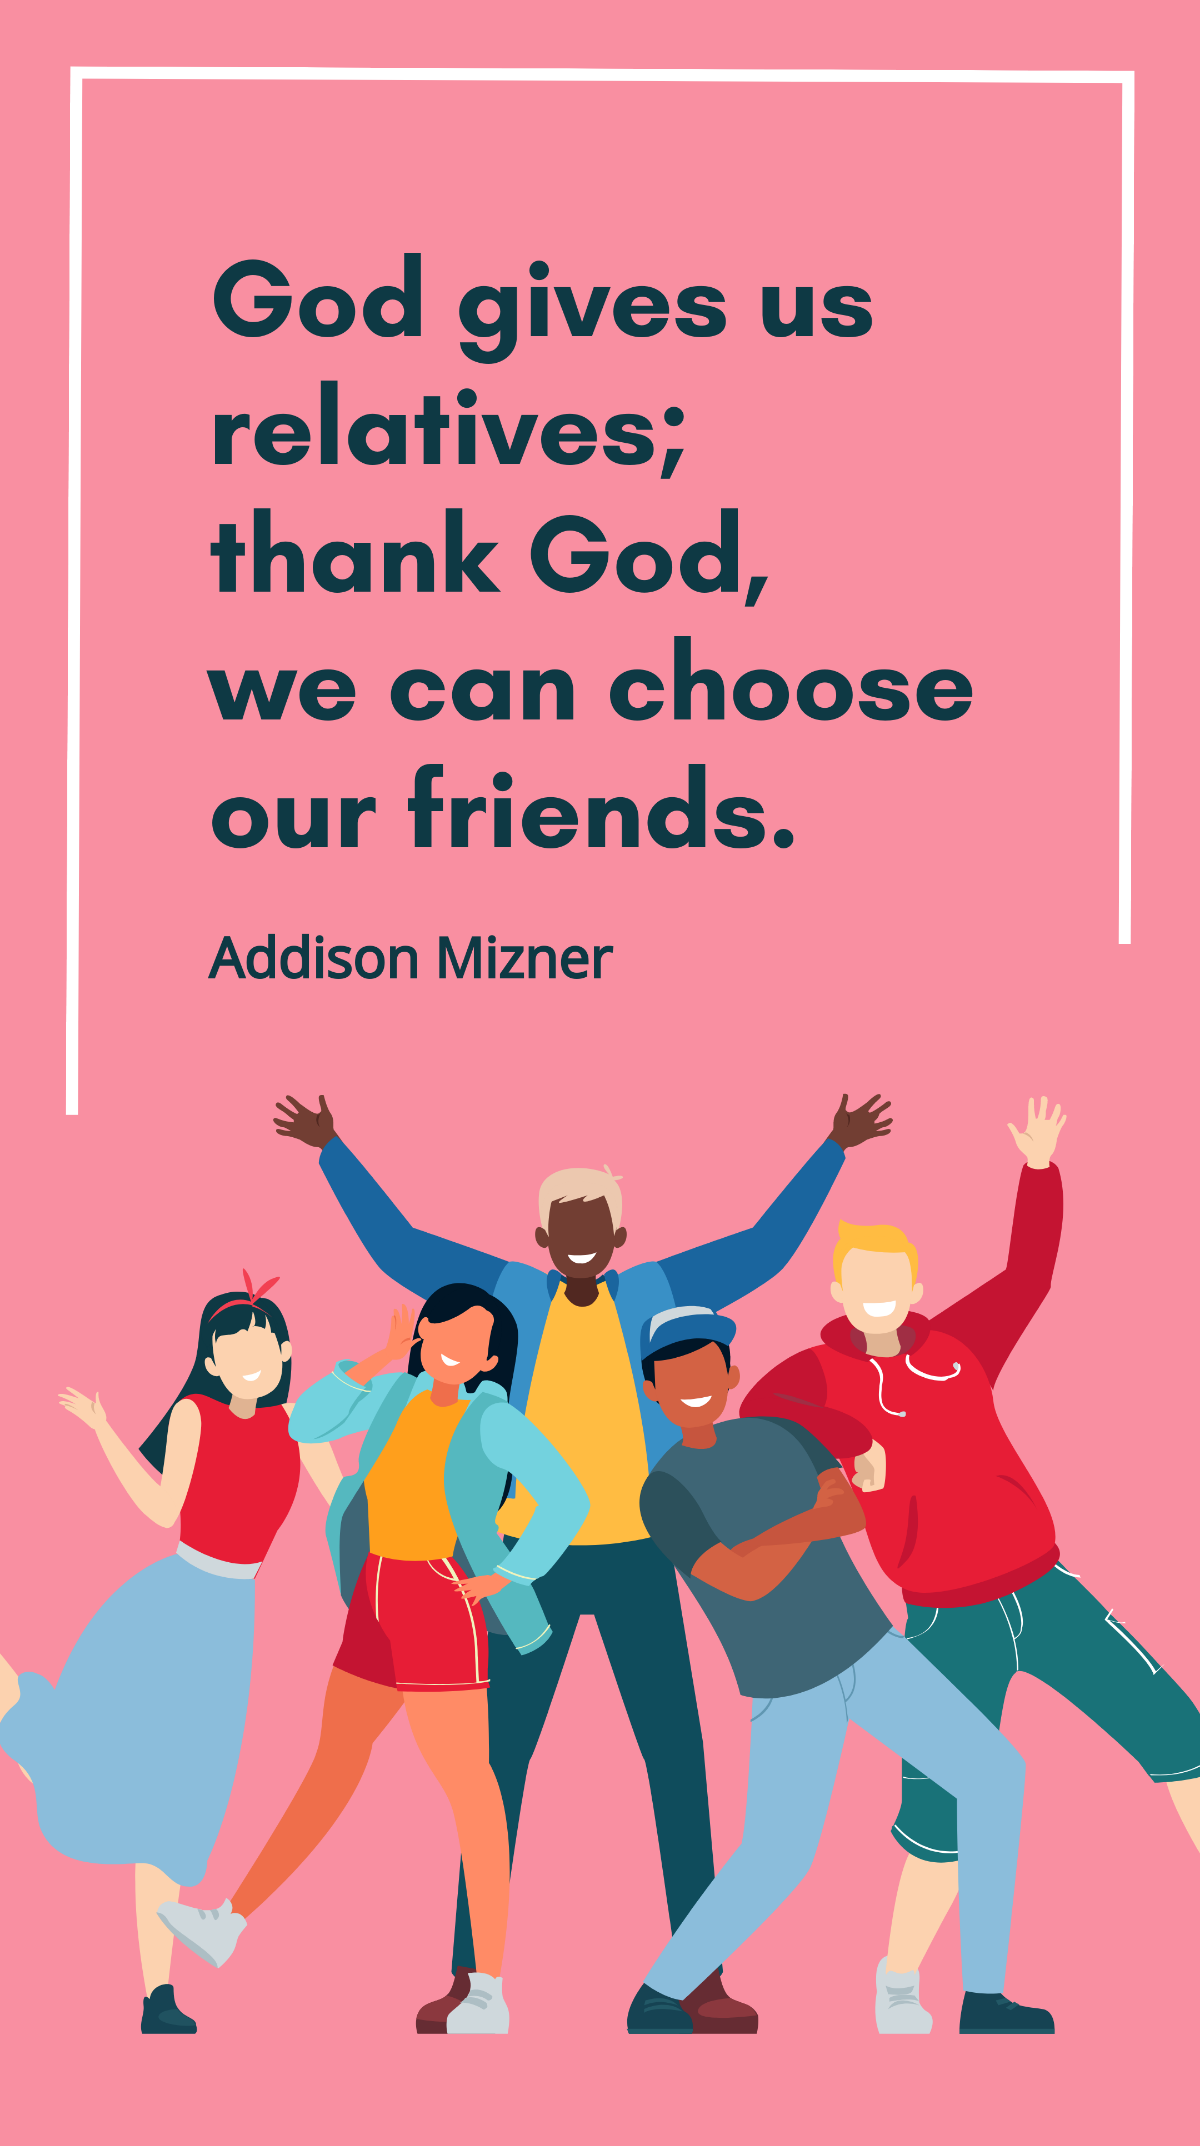 Addison Mizner - God gives us relatives; thank God, we can choose our friends. Template